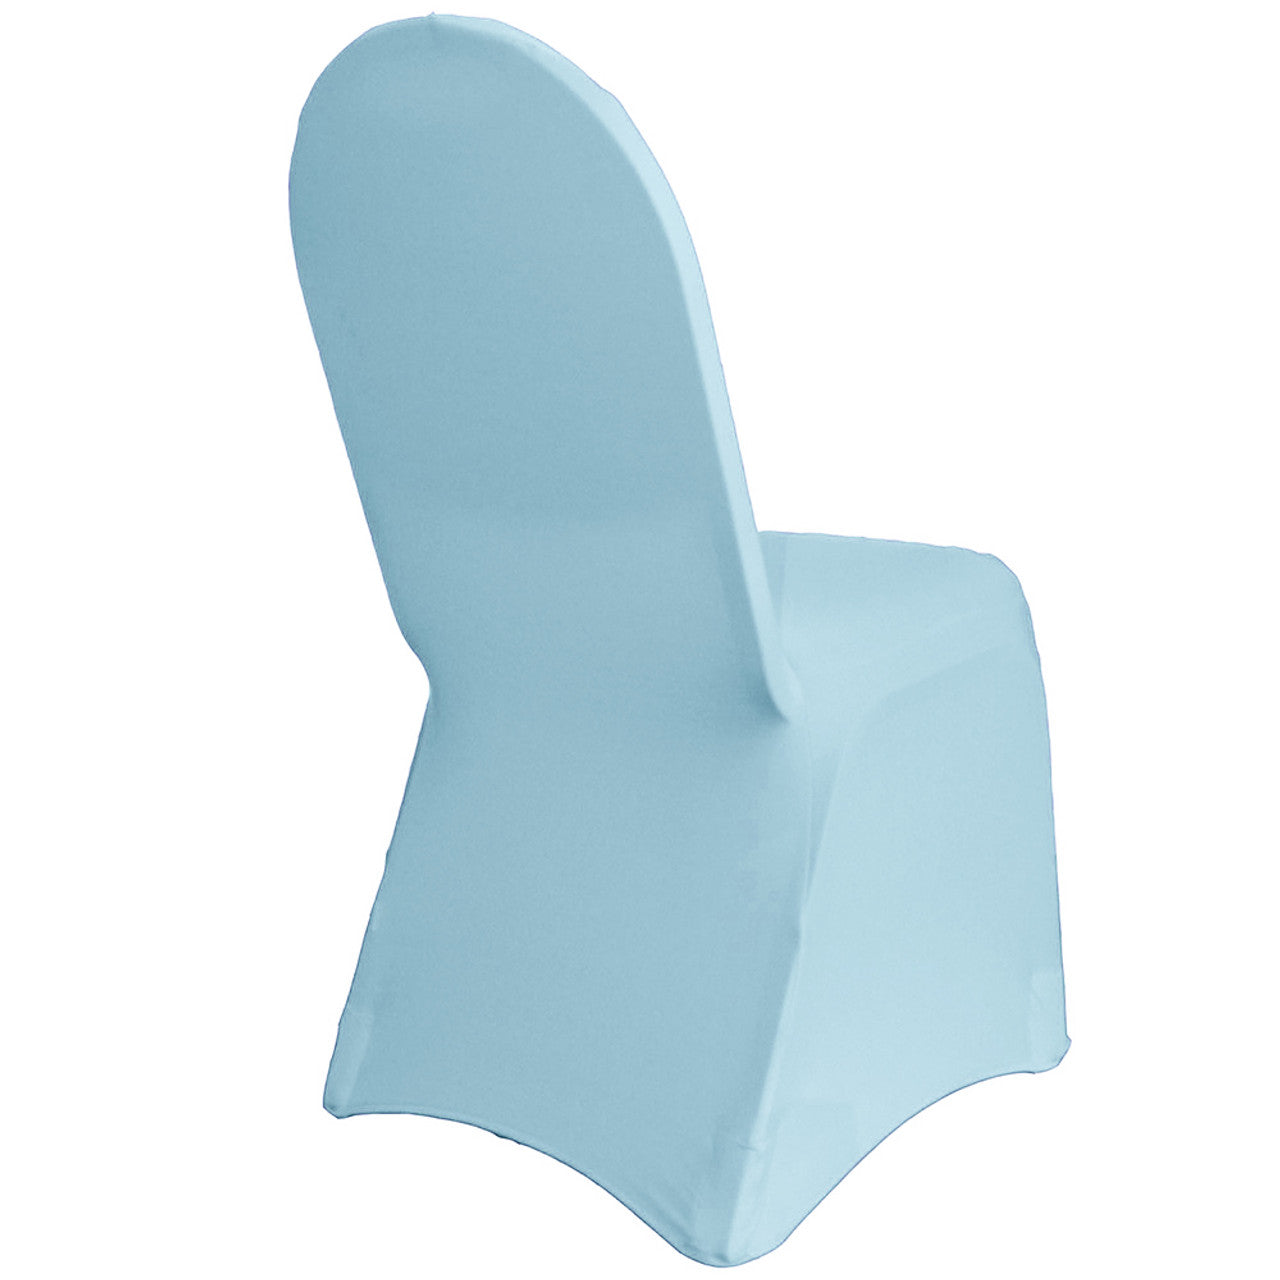 Spandex Folding Chair Cover in Dusty Blue – Urquid Linen